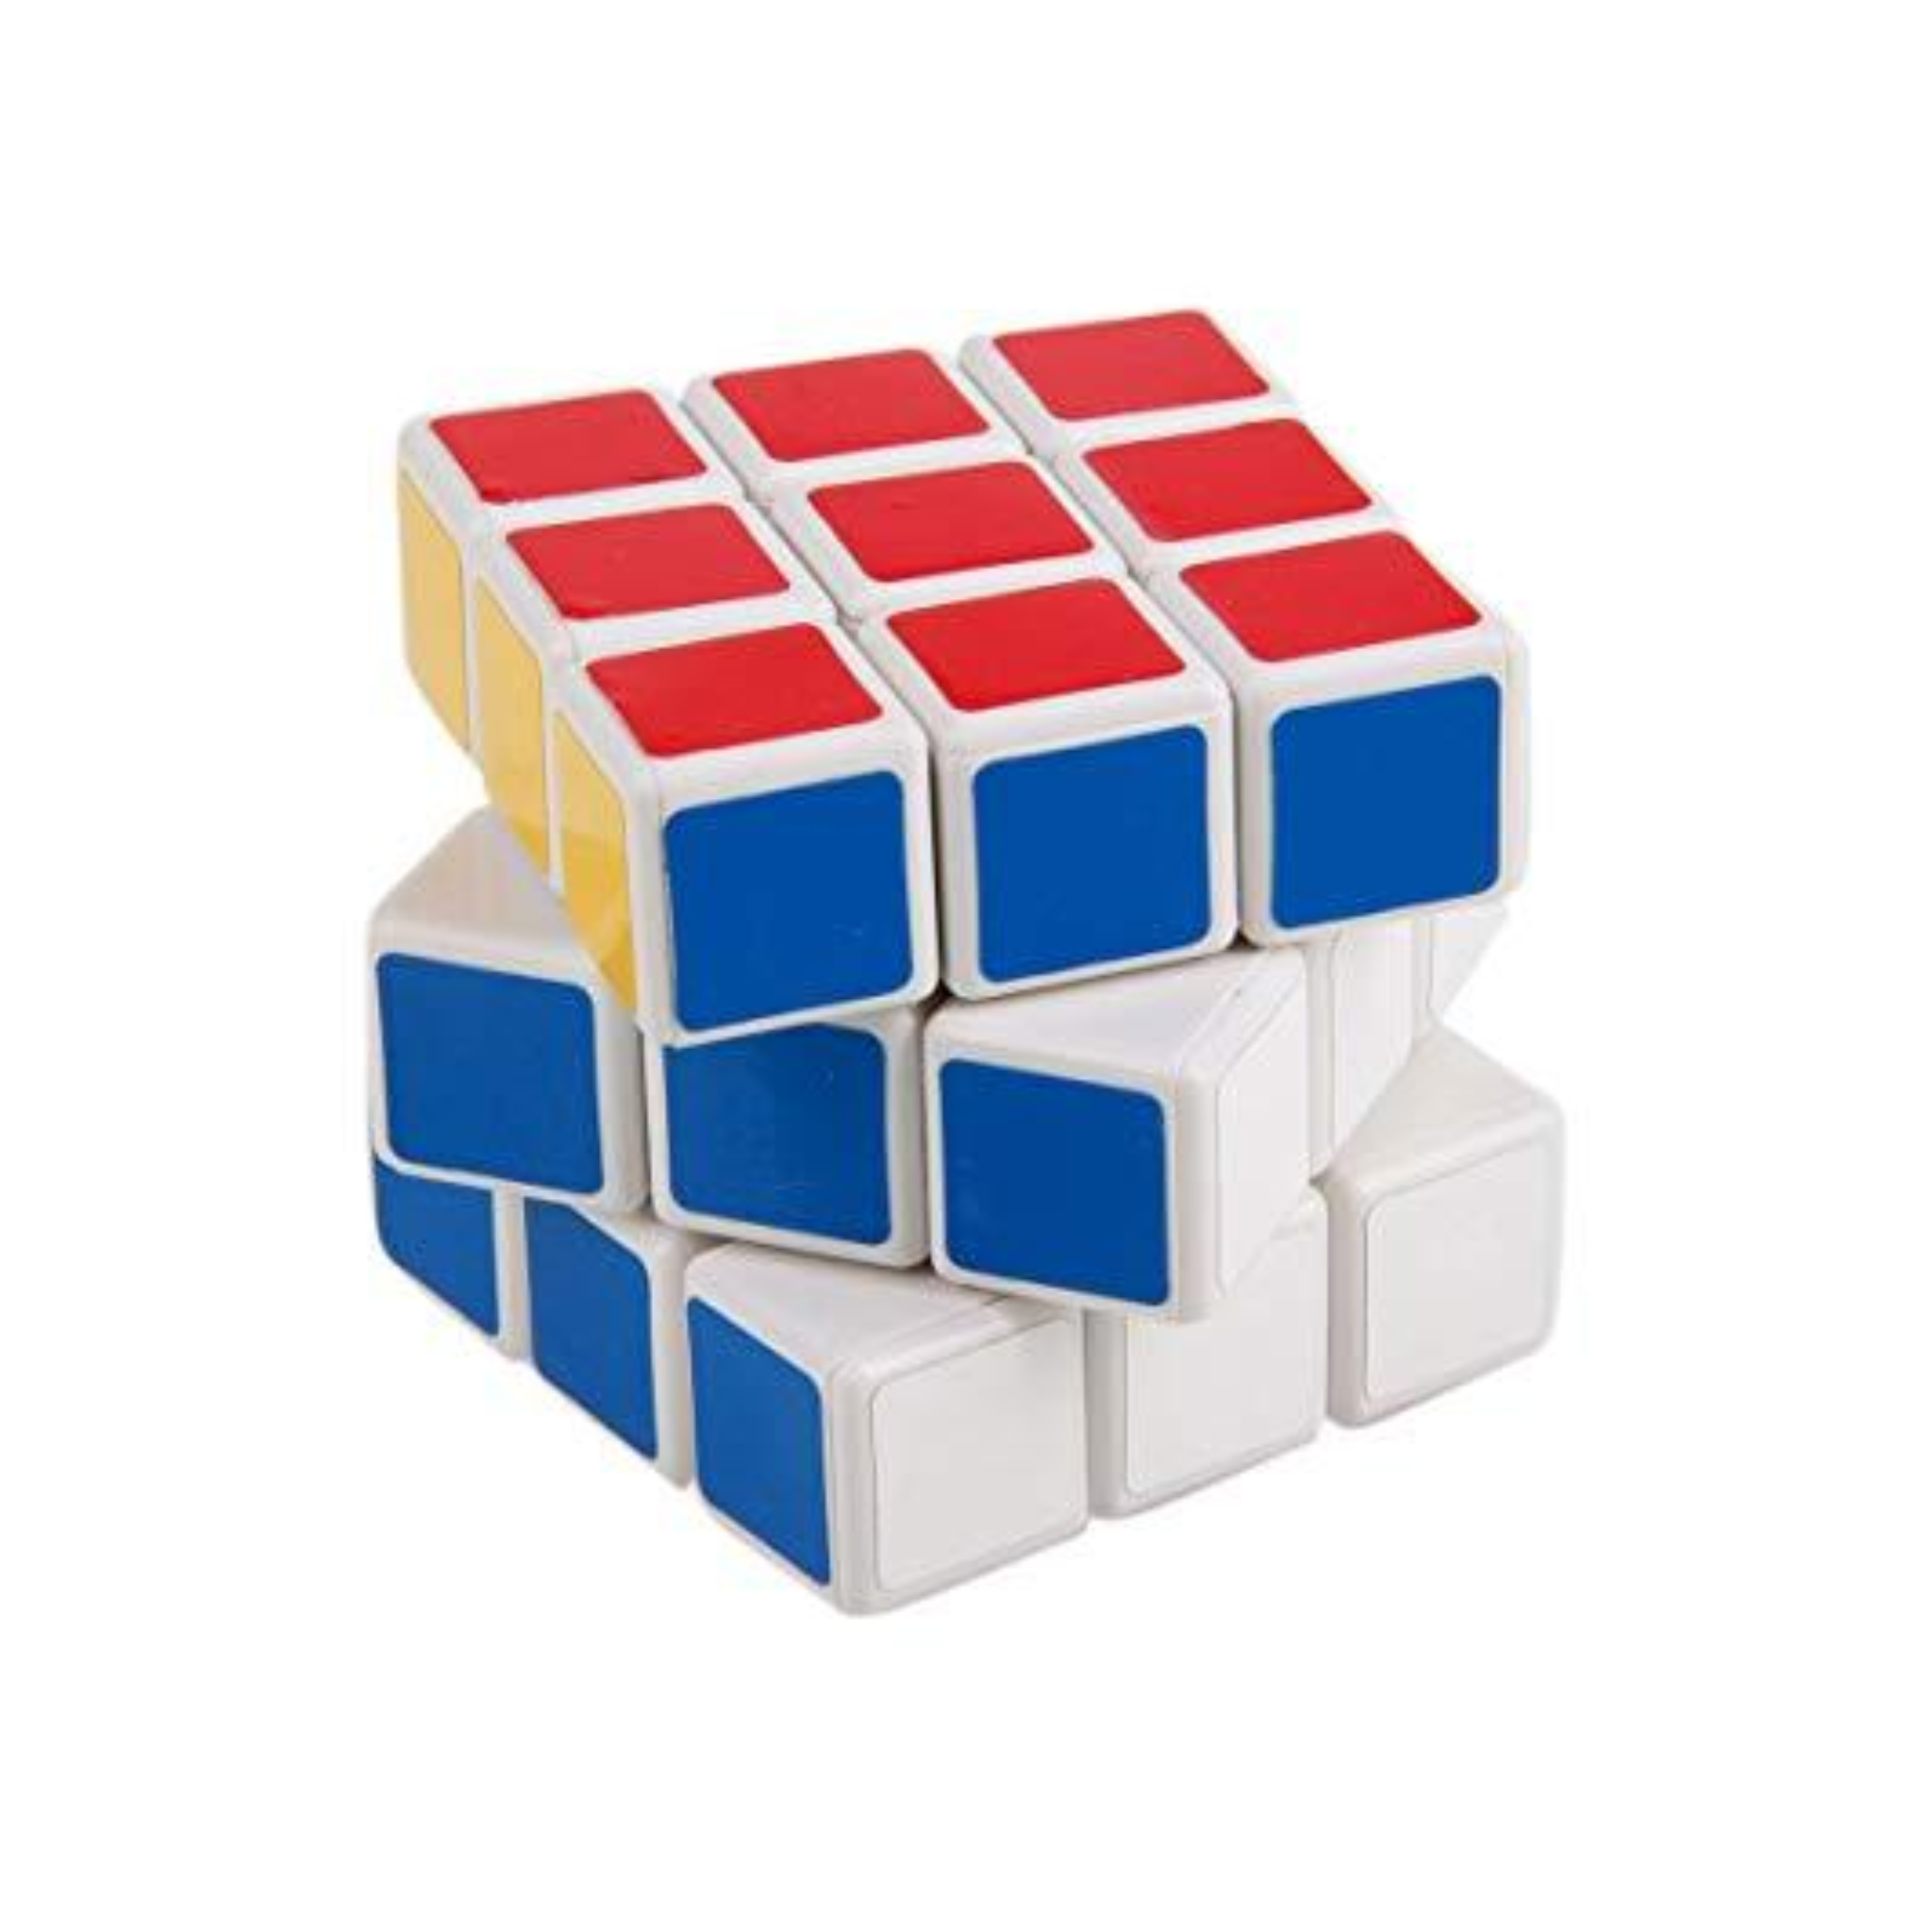 Rubik's Cube, High Quality Plastic Material, 3x3 Cube, for Kids'